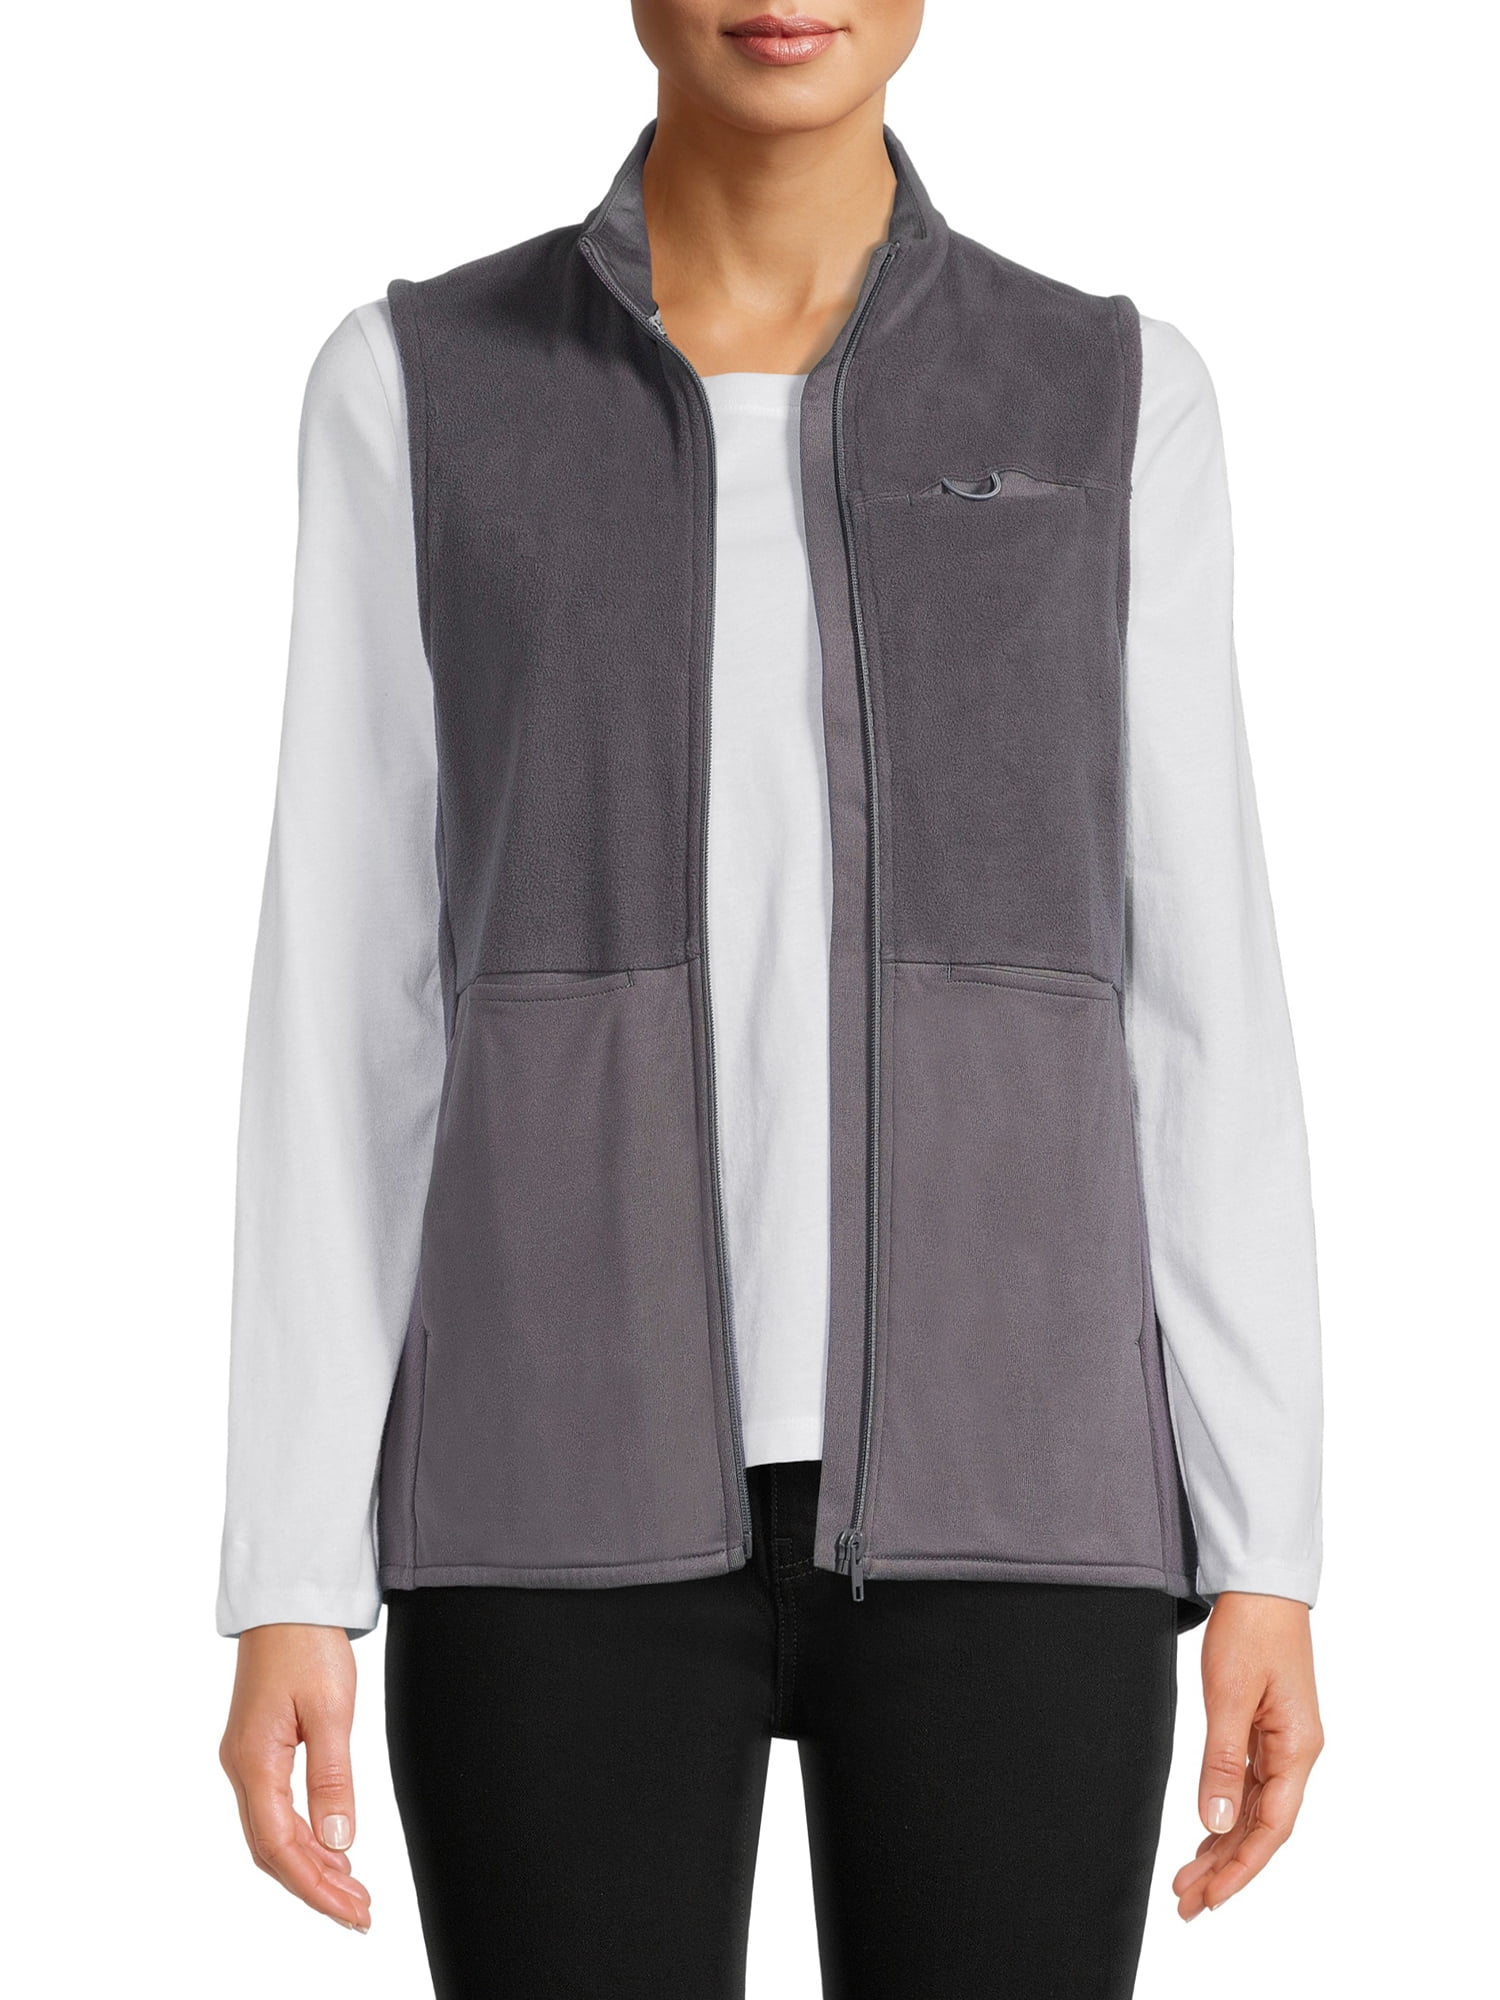 ClimateRight by Cuddl Duds Women’s and Women's Plus Knit Fleece Vest